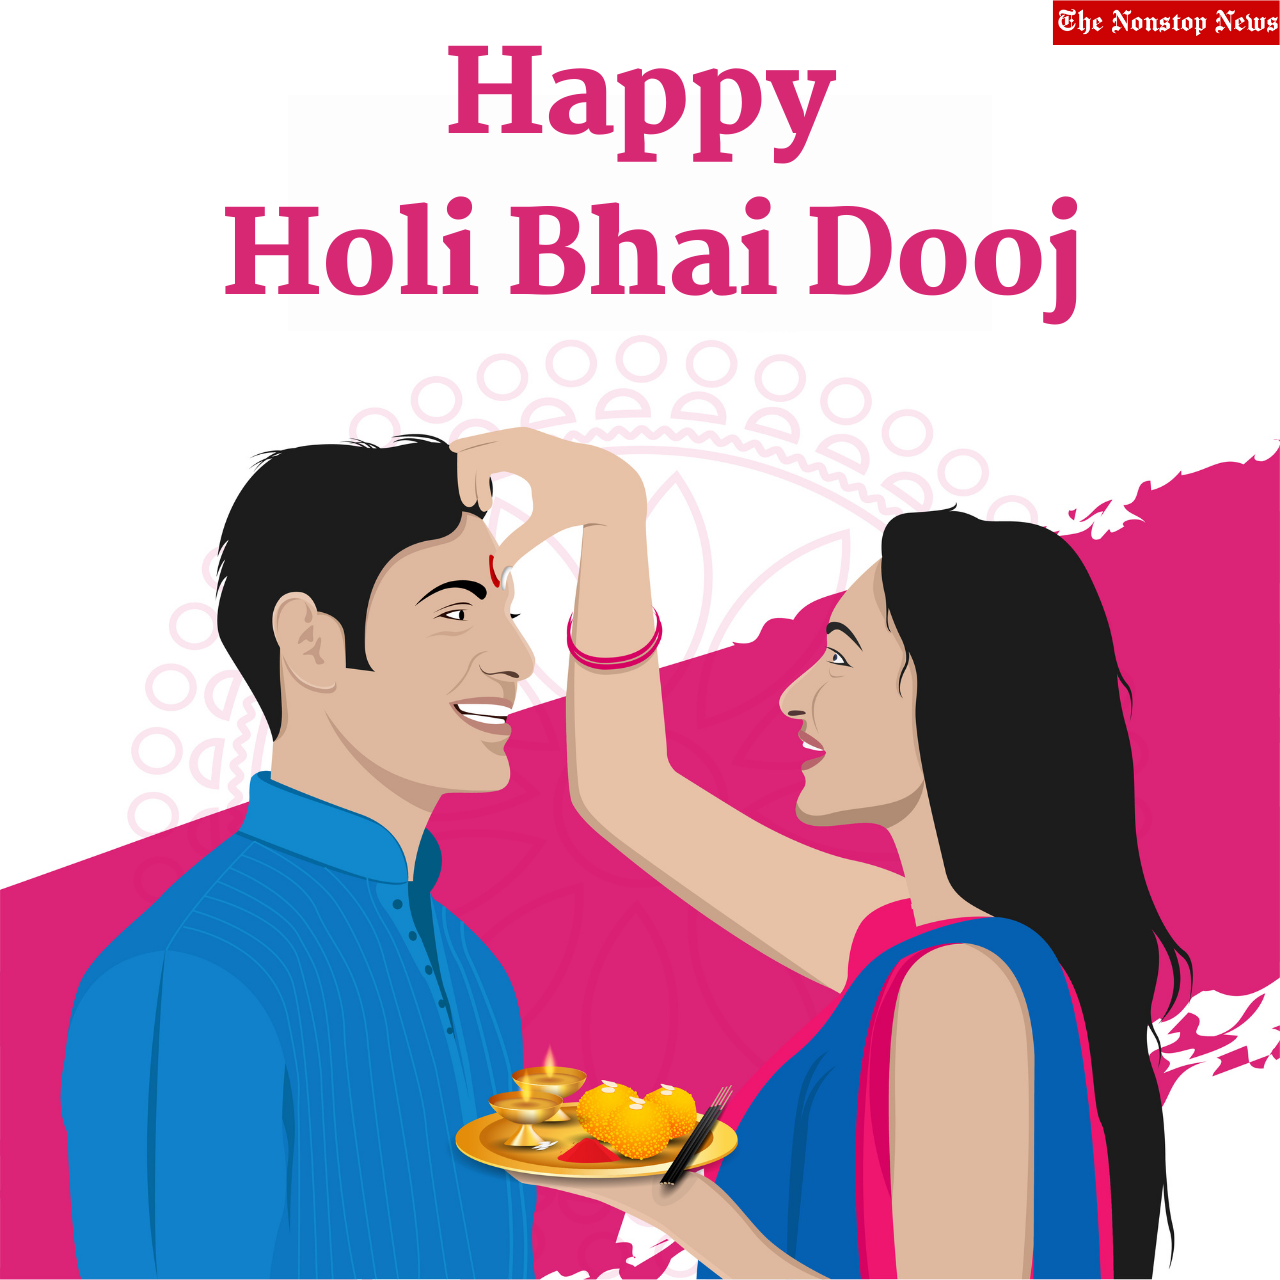 Holi Bhai Dooj 2022 Wishes, HD Images, Messages, Quotes, Greetings, POsters to Share